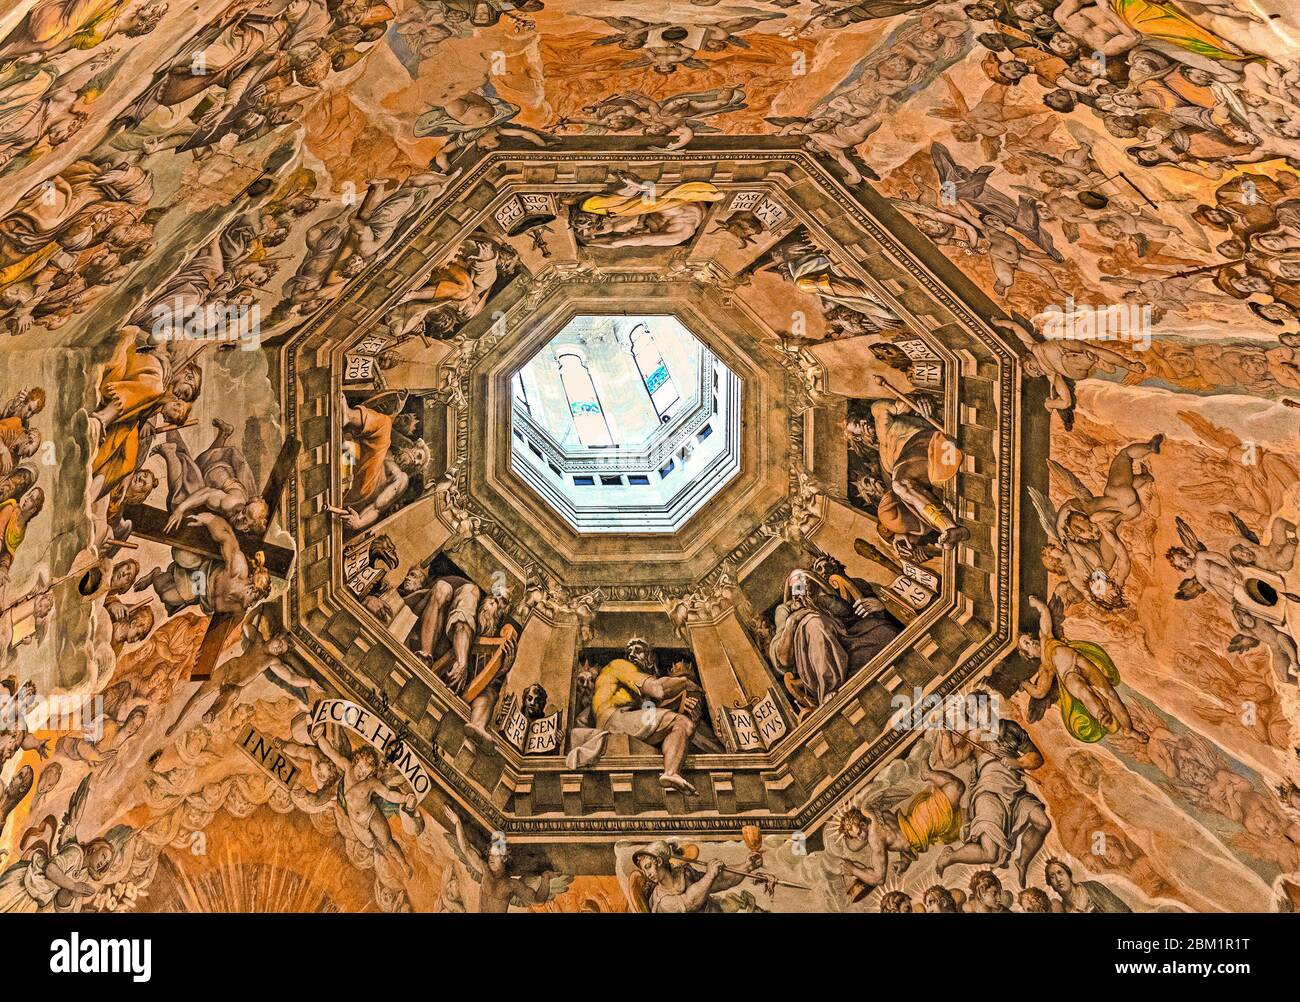 the painted inside of the dome on the duomo, florence cathedral, florence, tuscany, italy. Stock Photo